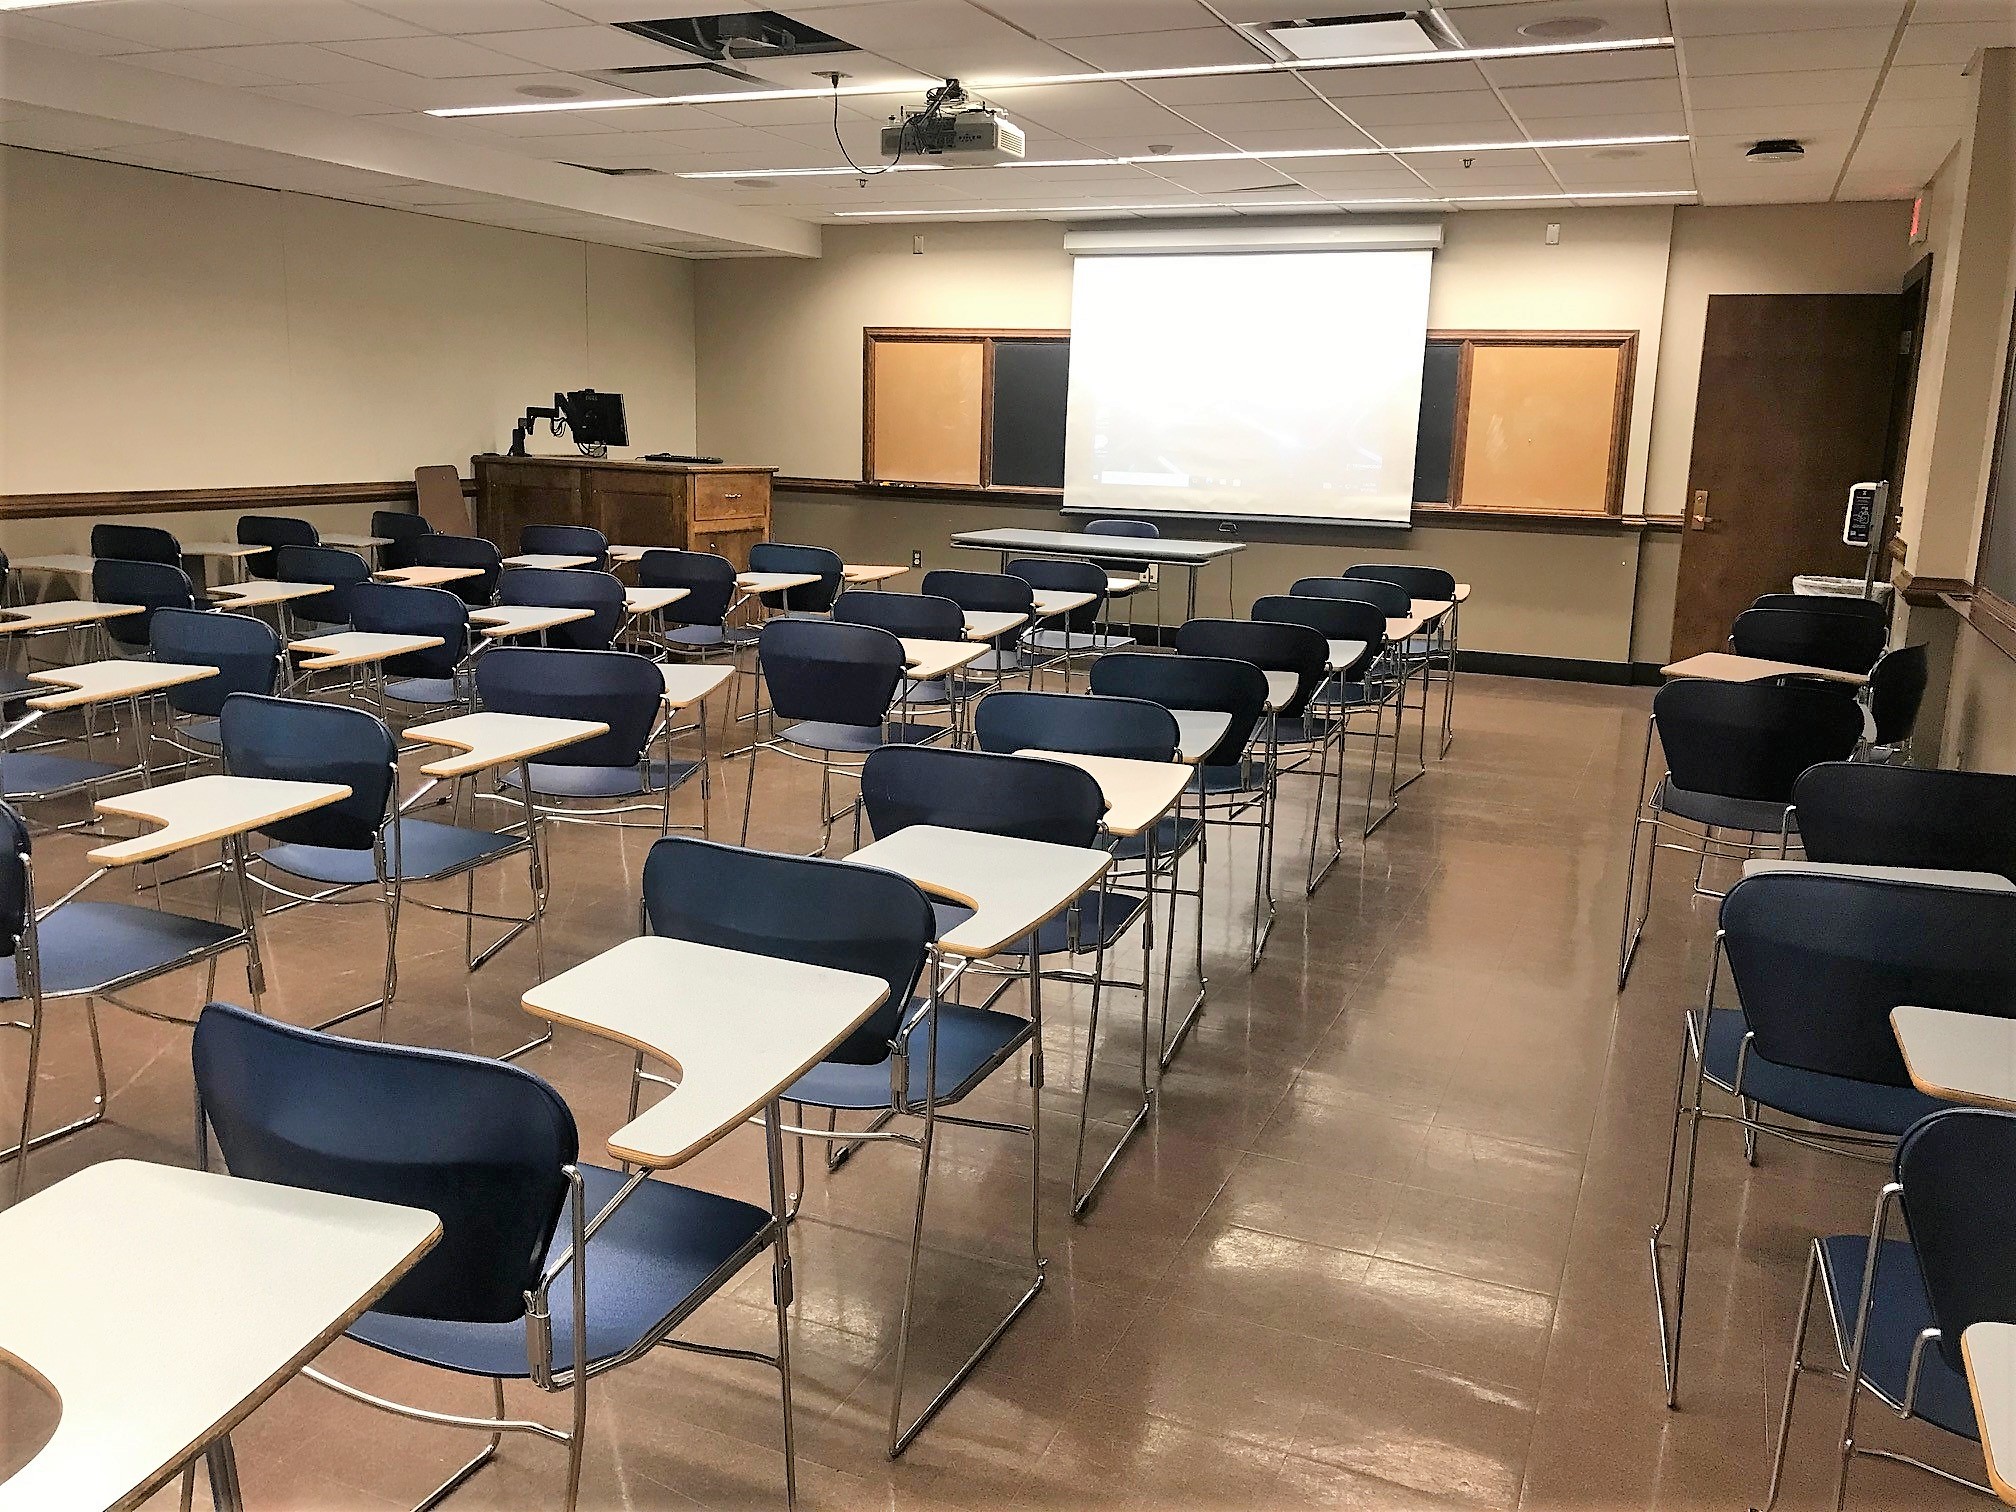 A view of the classroom with movable tableted arm chairs, chalkboard, and instructor table in front. 